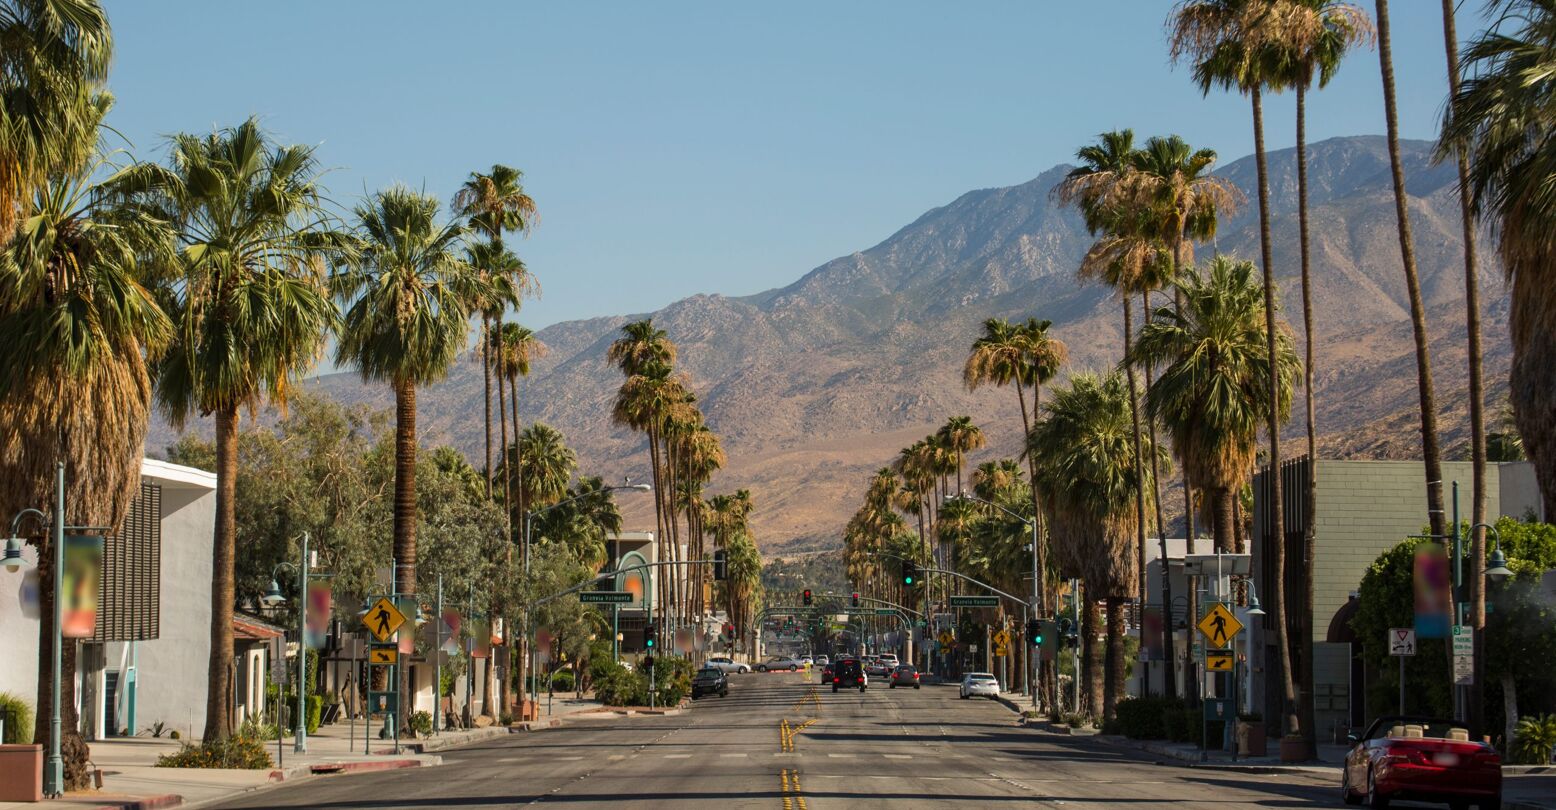 View of Downtown Palm Springs, California.